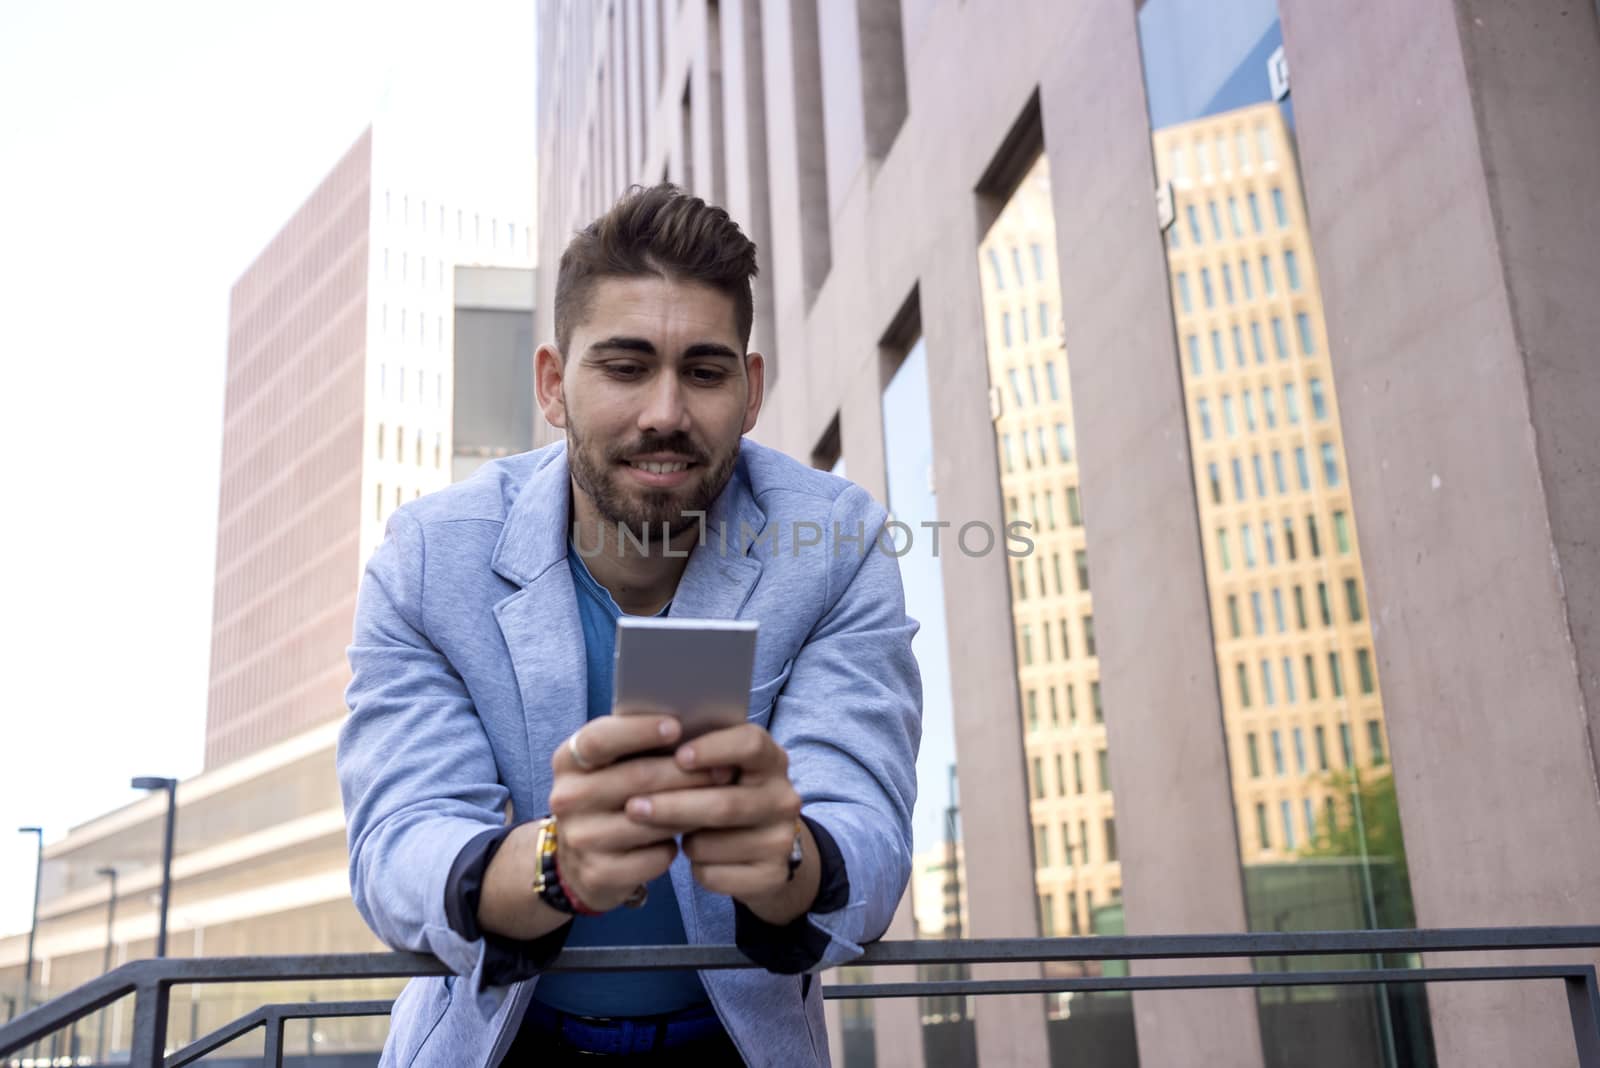 Portrait of Handsome young man smiling when he is using his mobile phone